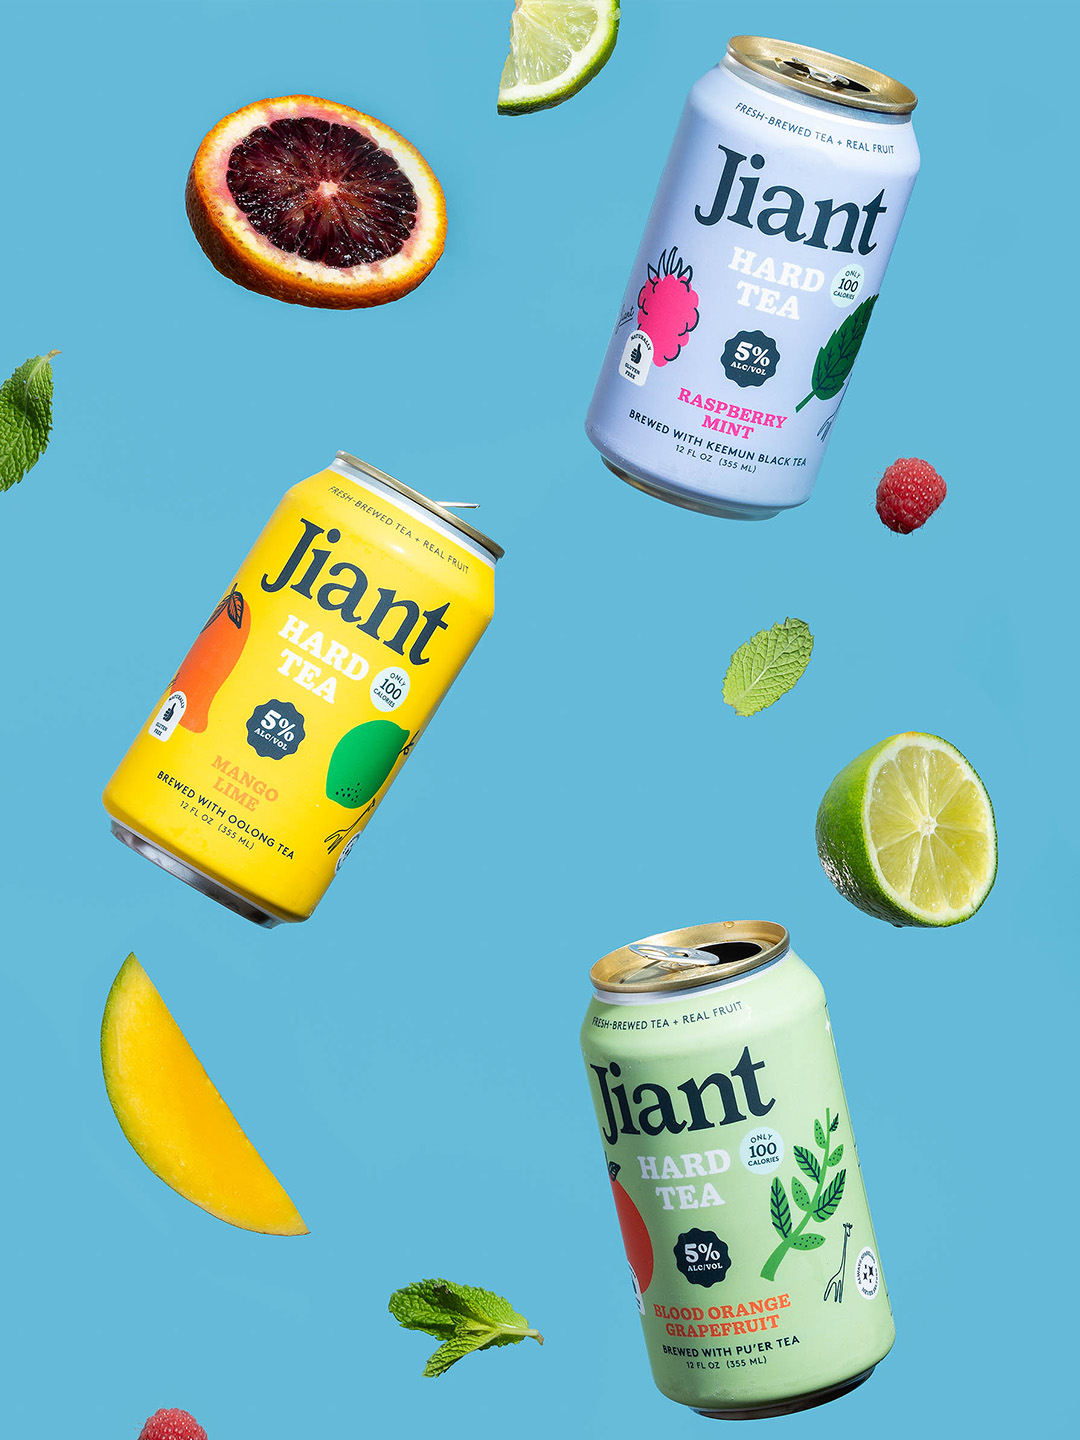 Jiant Hard Tea Branding and Design by Colony